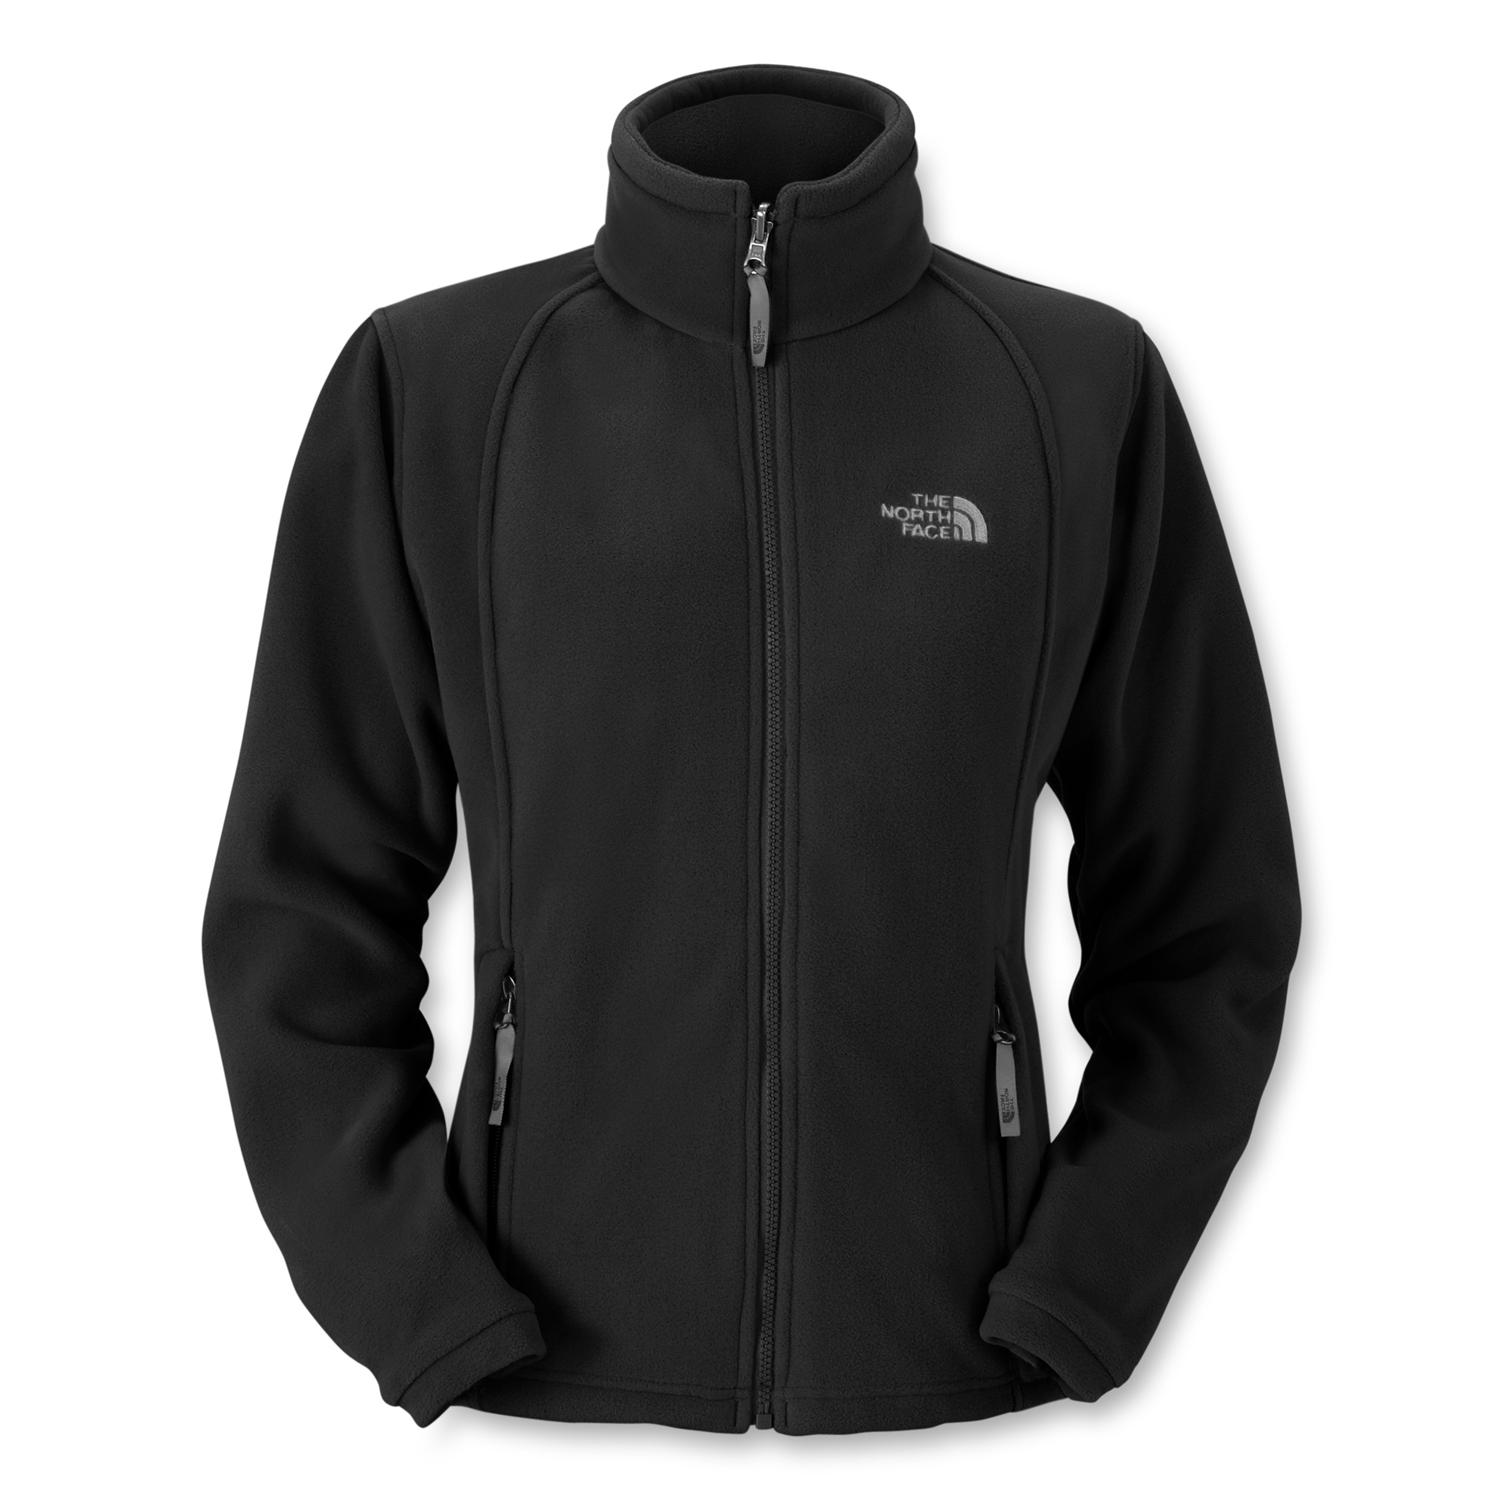 The North Face Khumbu Jacket - Women's | evo outlet